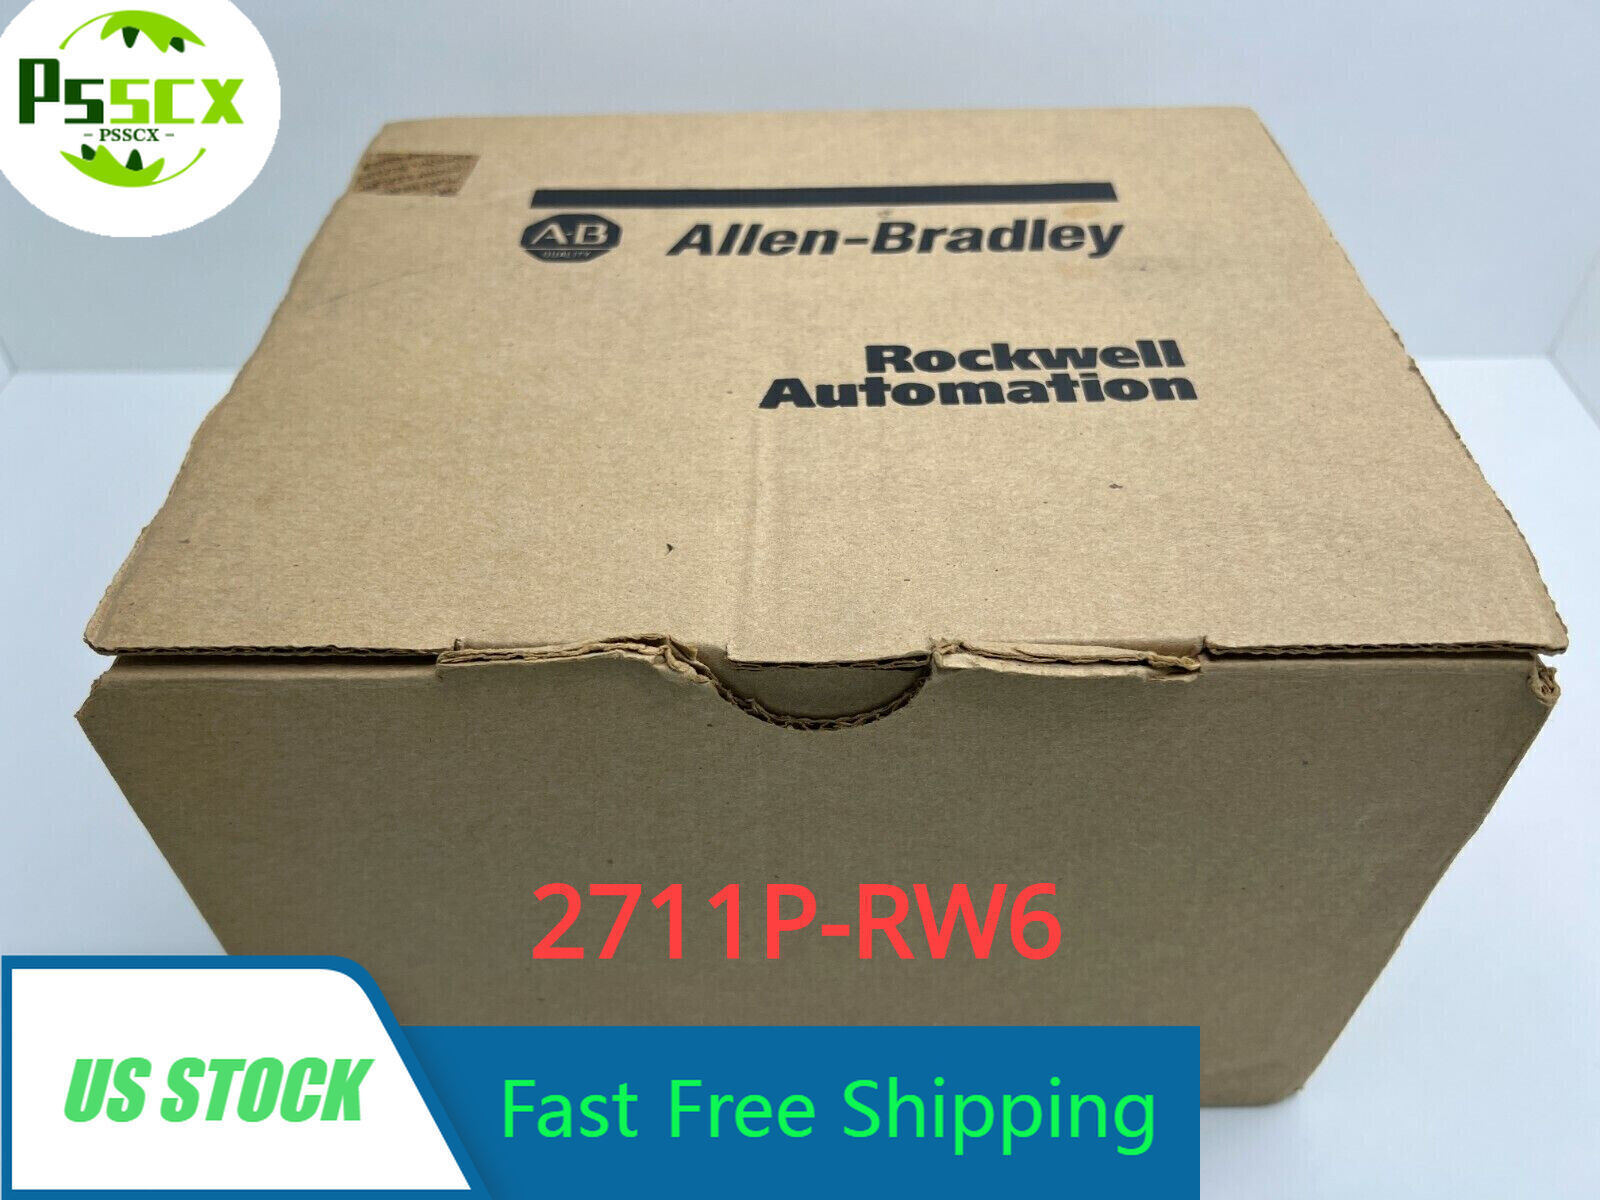 New 2711P-RW6 2711PRW6 1Pcs Free Expedited Shipping In Box